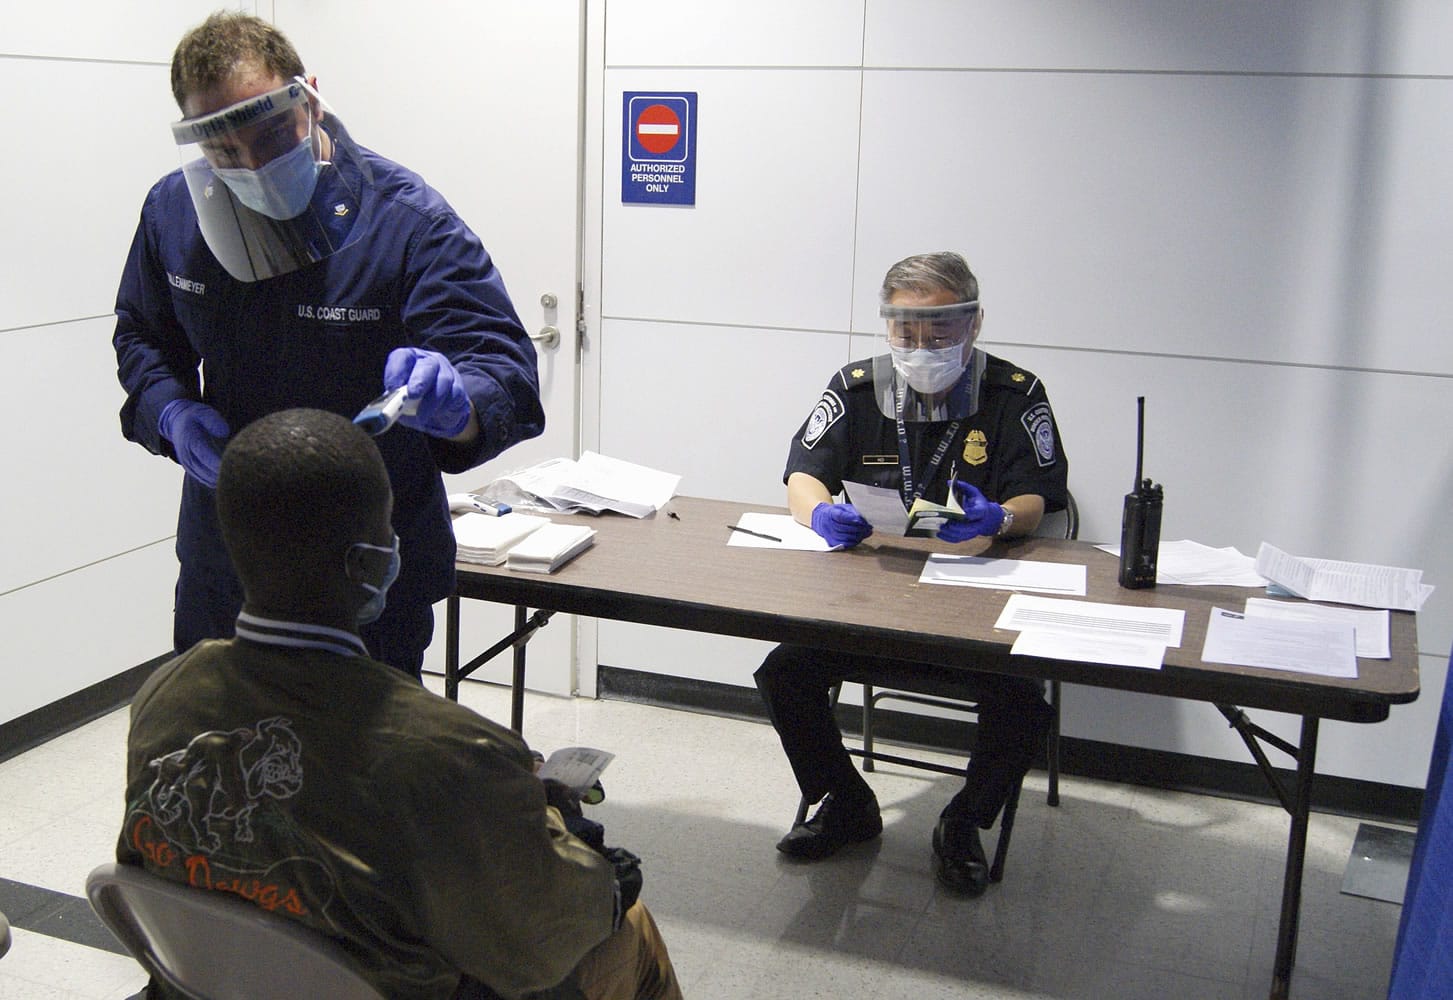 U.S. Coast Guard Health Technician Nathan Wallenmeyer, left, and CBP supervisor Sam Ko, right, conduct prescreening measures on a passenger who has arrived from Sierra Leone at O'Hare International Airport's Terminal 5 in Chicago. Demands are rising in Washington for the U.S.